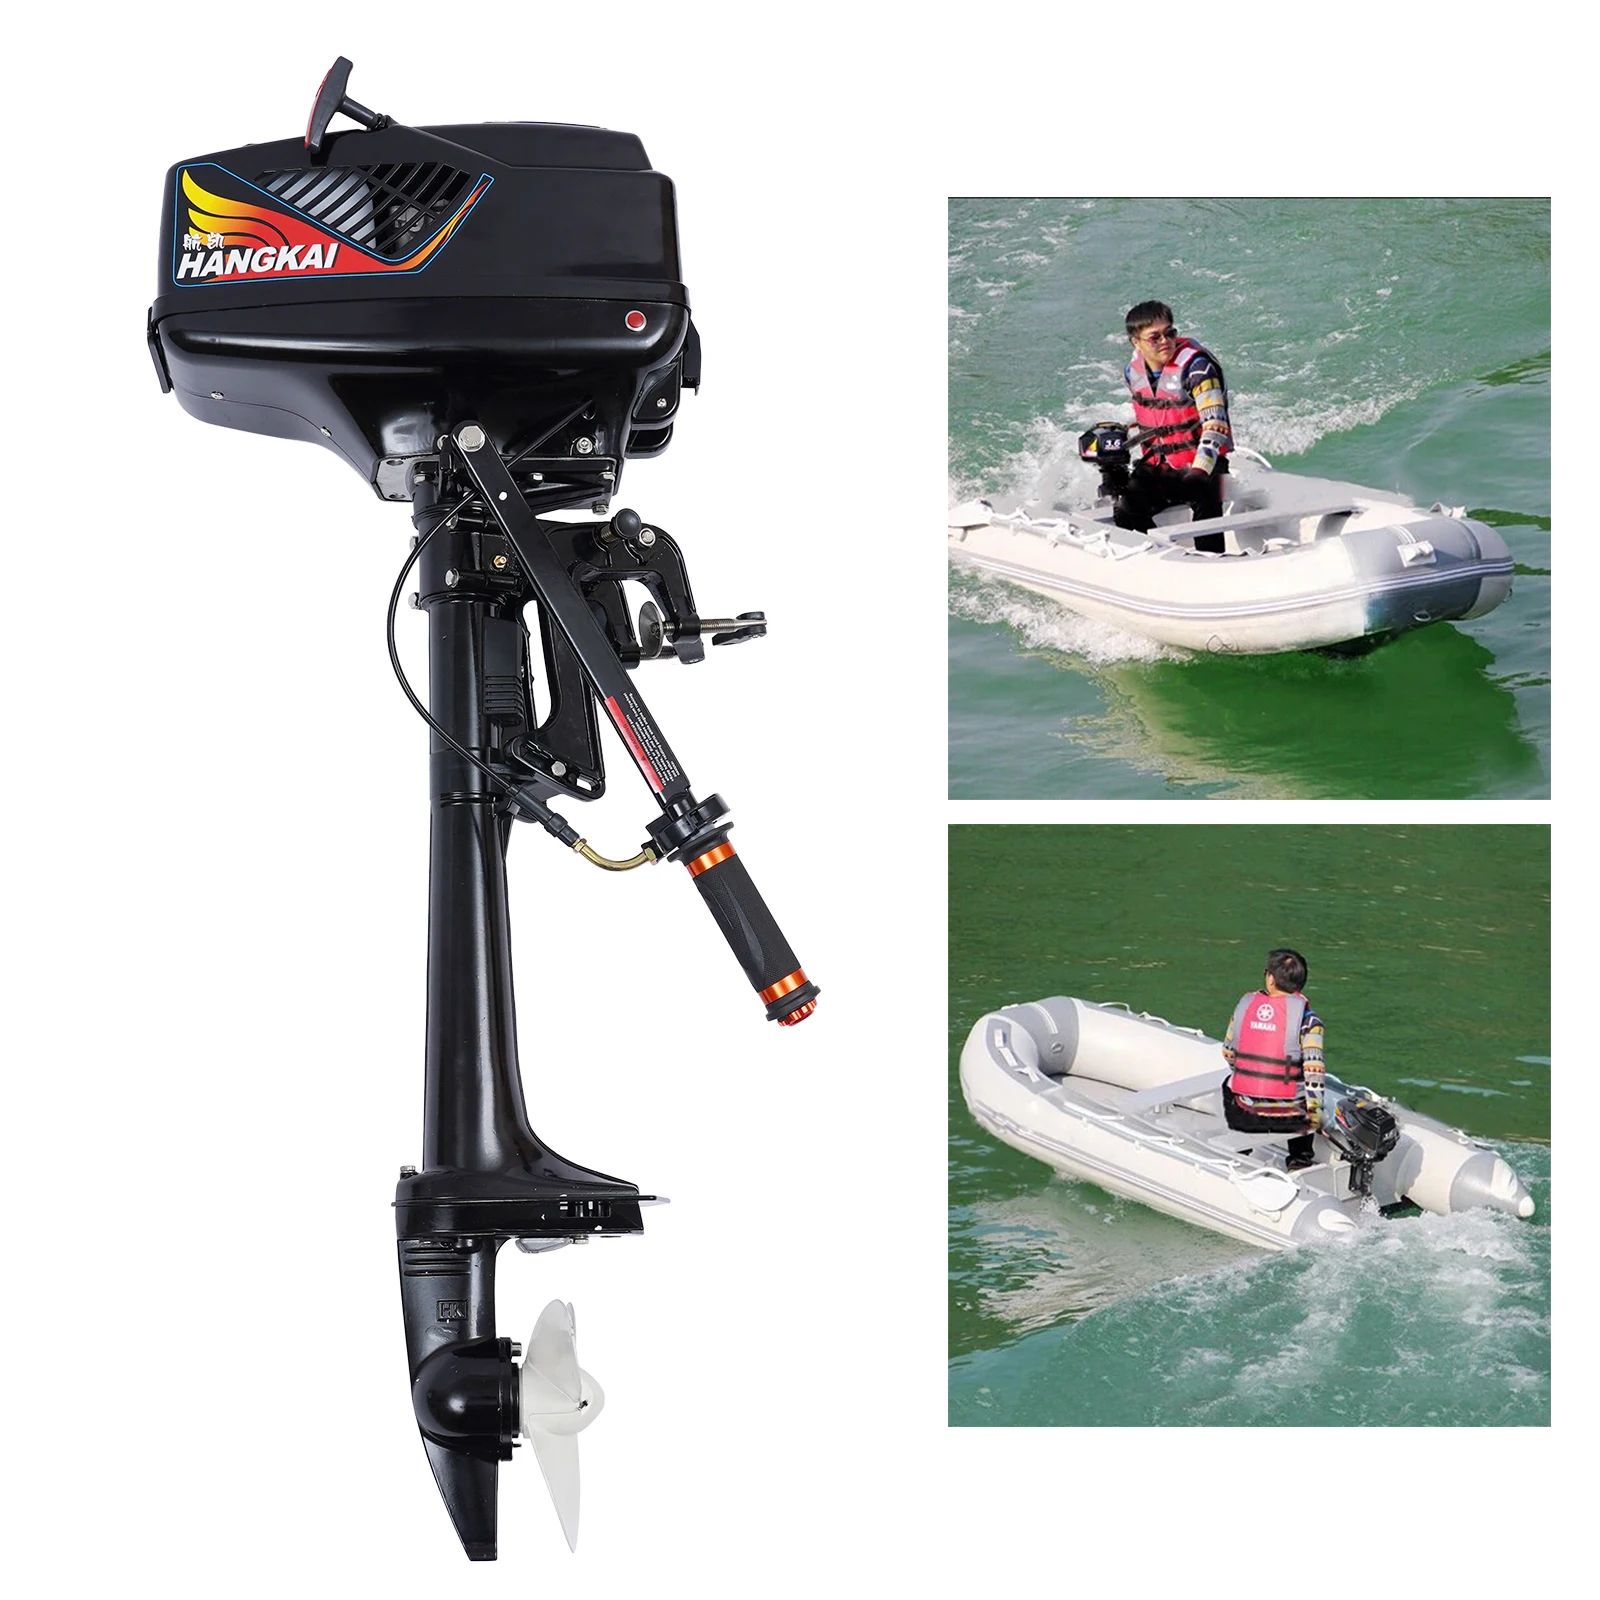 3.6HP 2-Stroke Outboard Motor Fishing Boat Engine Water Cooling System CDI USA High Speed Shipping Outboard Motor Boat Engine 3 6ps 2 stroke outboard motor gasoline engine water cooling system outboard fishing boat engine